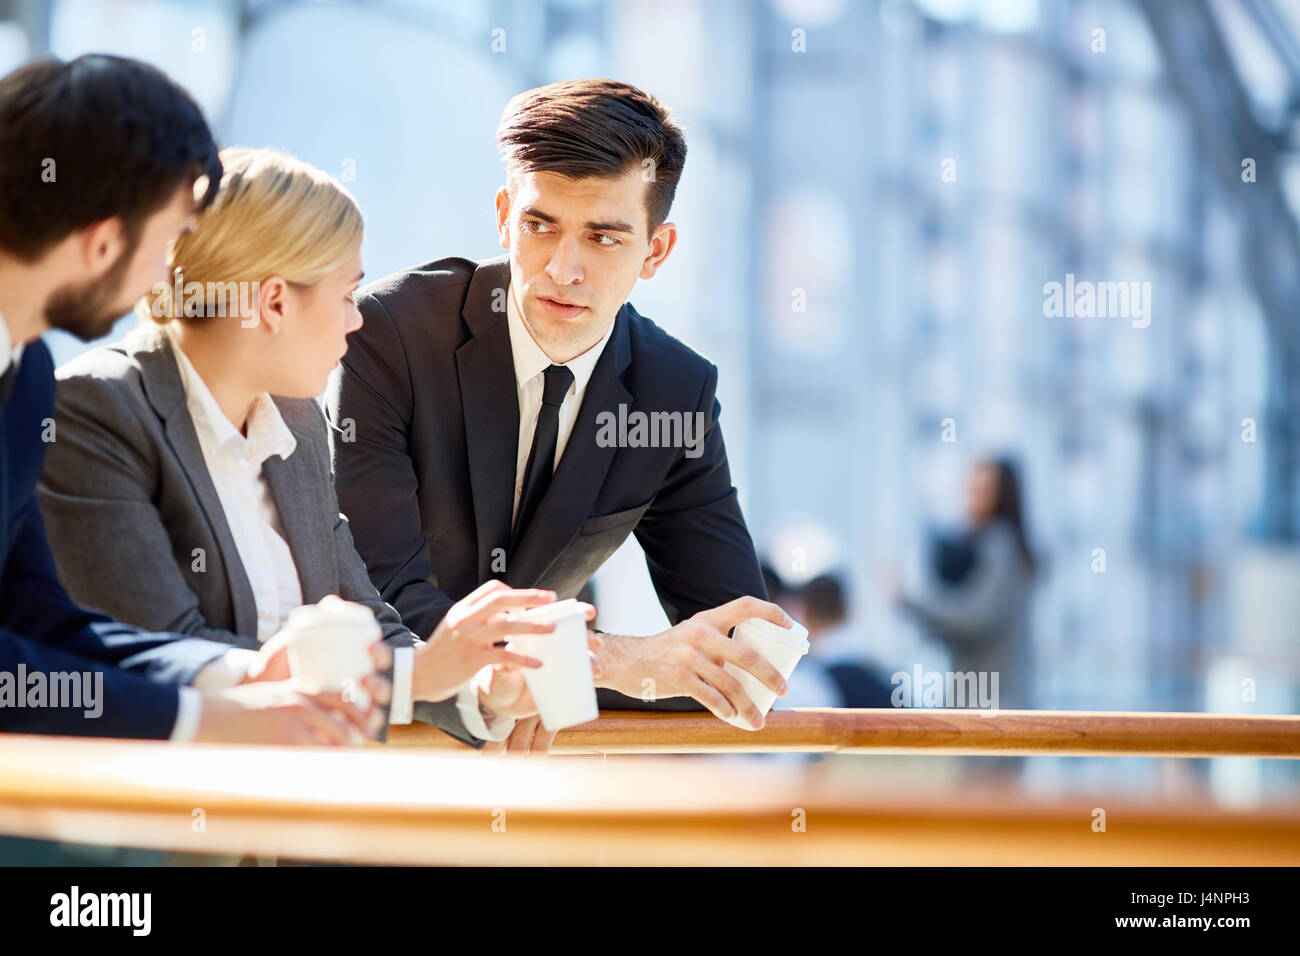 Portrait of three business people, one woman and two men, discussing work at break  in modern office building leaning on railing and holding coffee cu Stock Photo